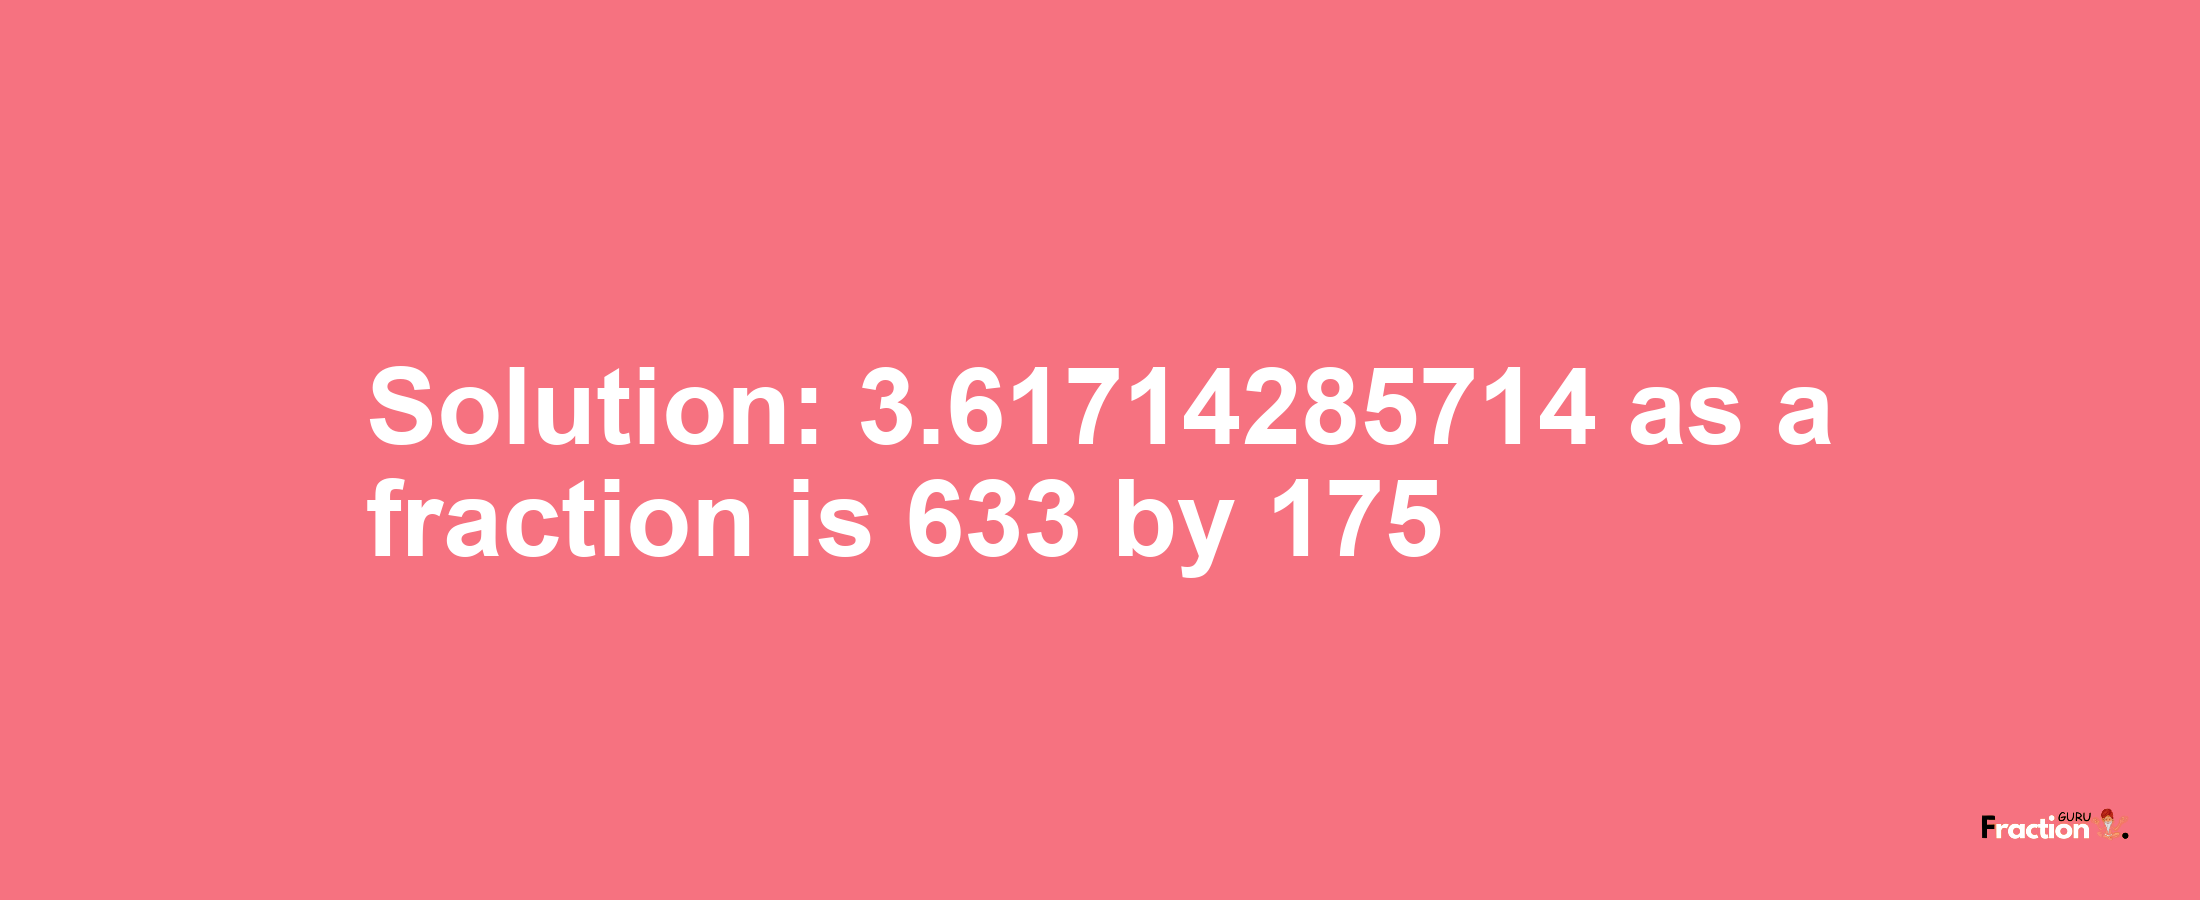 Solution:3.61714285714 as a fraction is 633/175